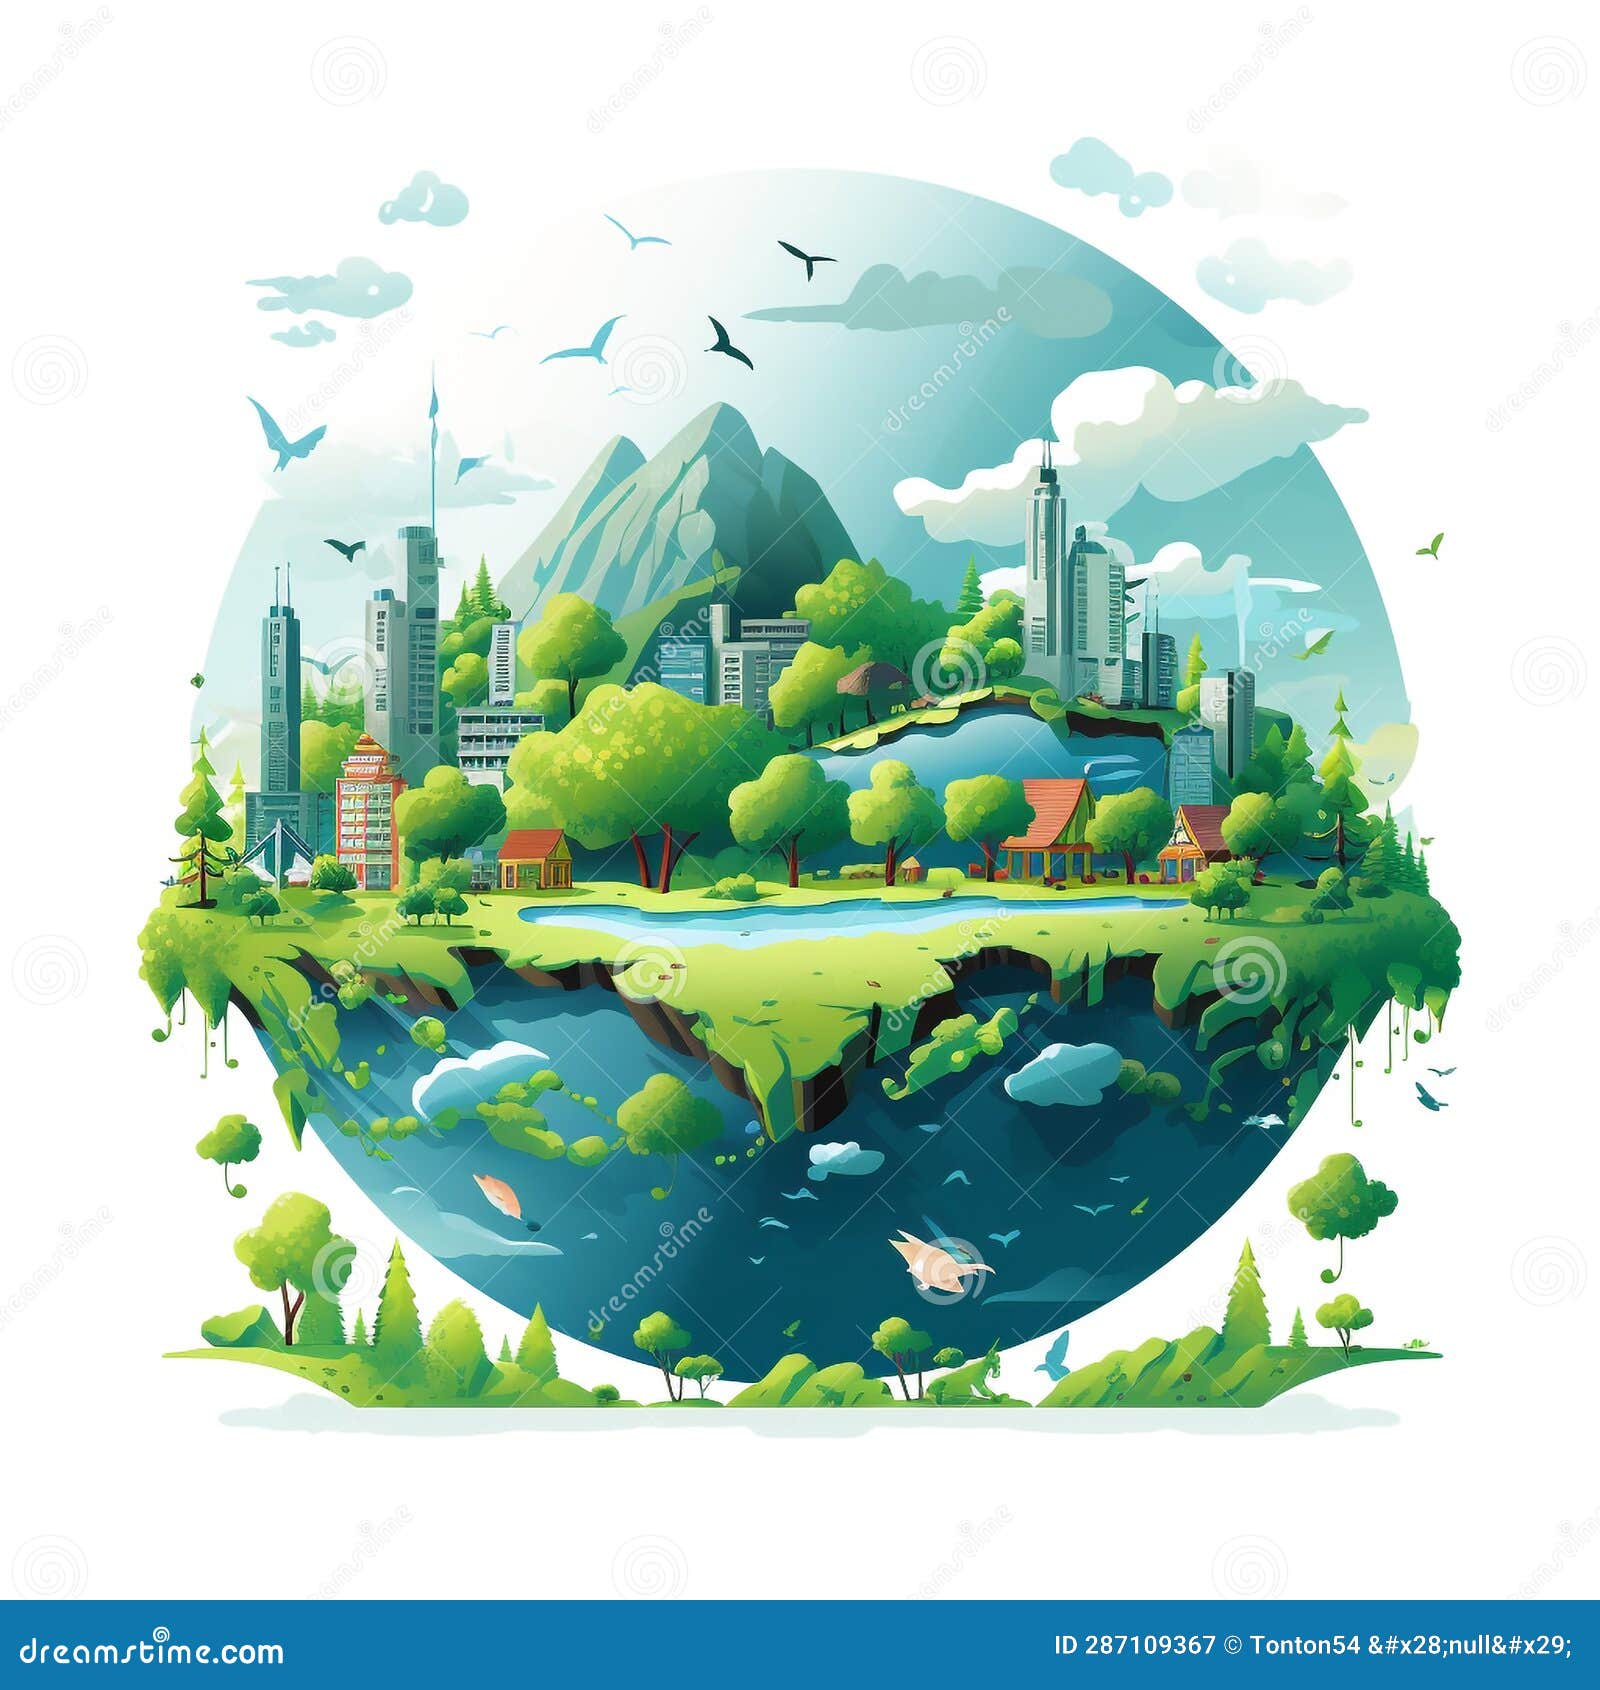 world environment day earth-d planet with cities and trees 